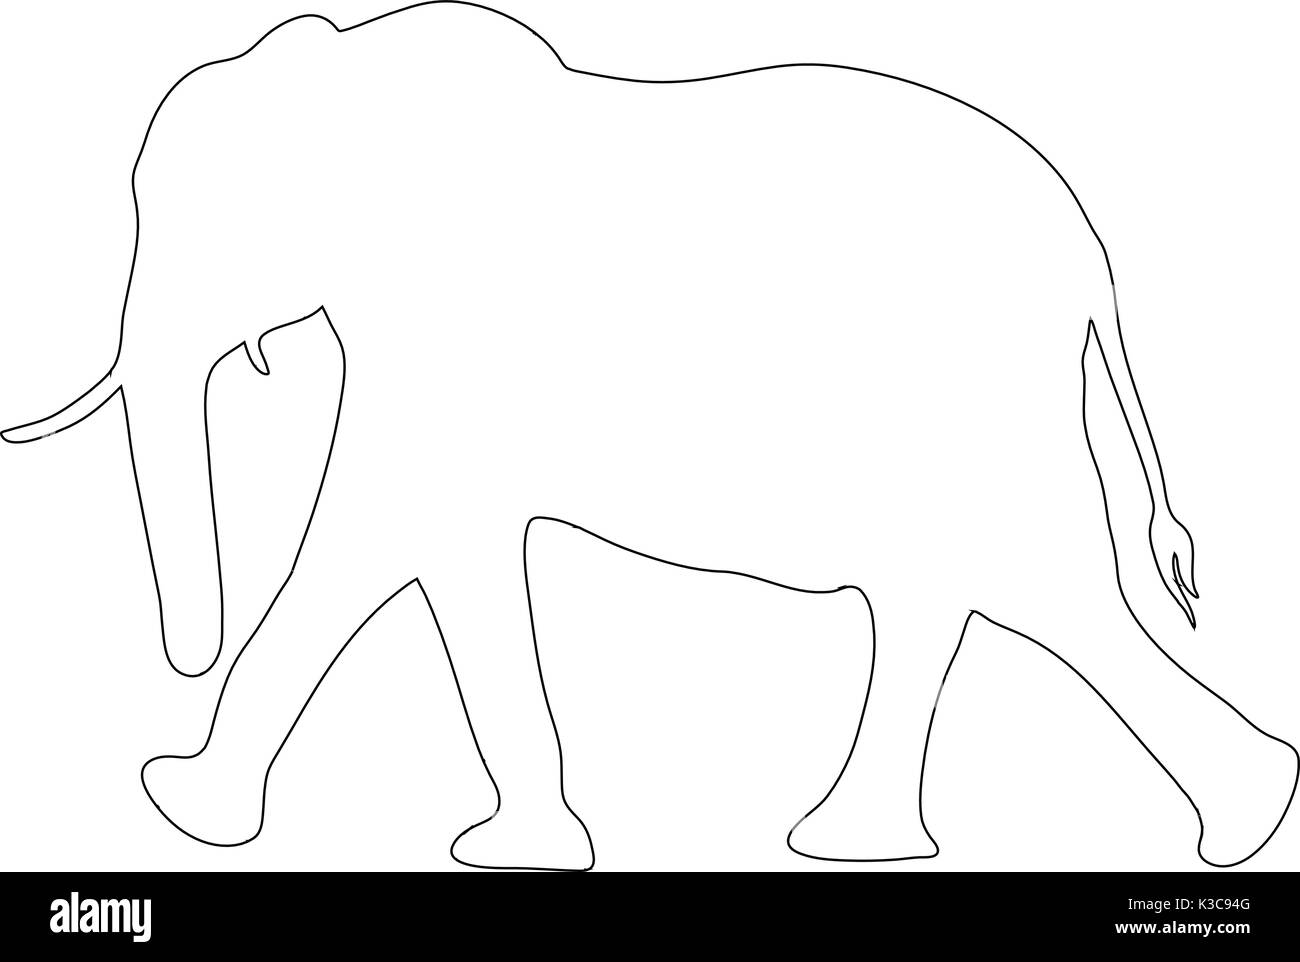 elephant outline drawing easy 05 | How to draw an elephant step by step | elephant  drawing - YouTube